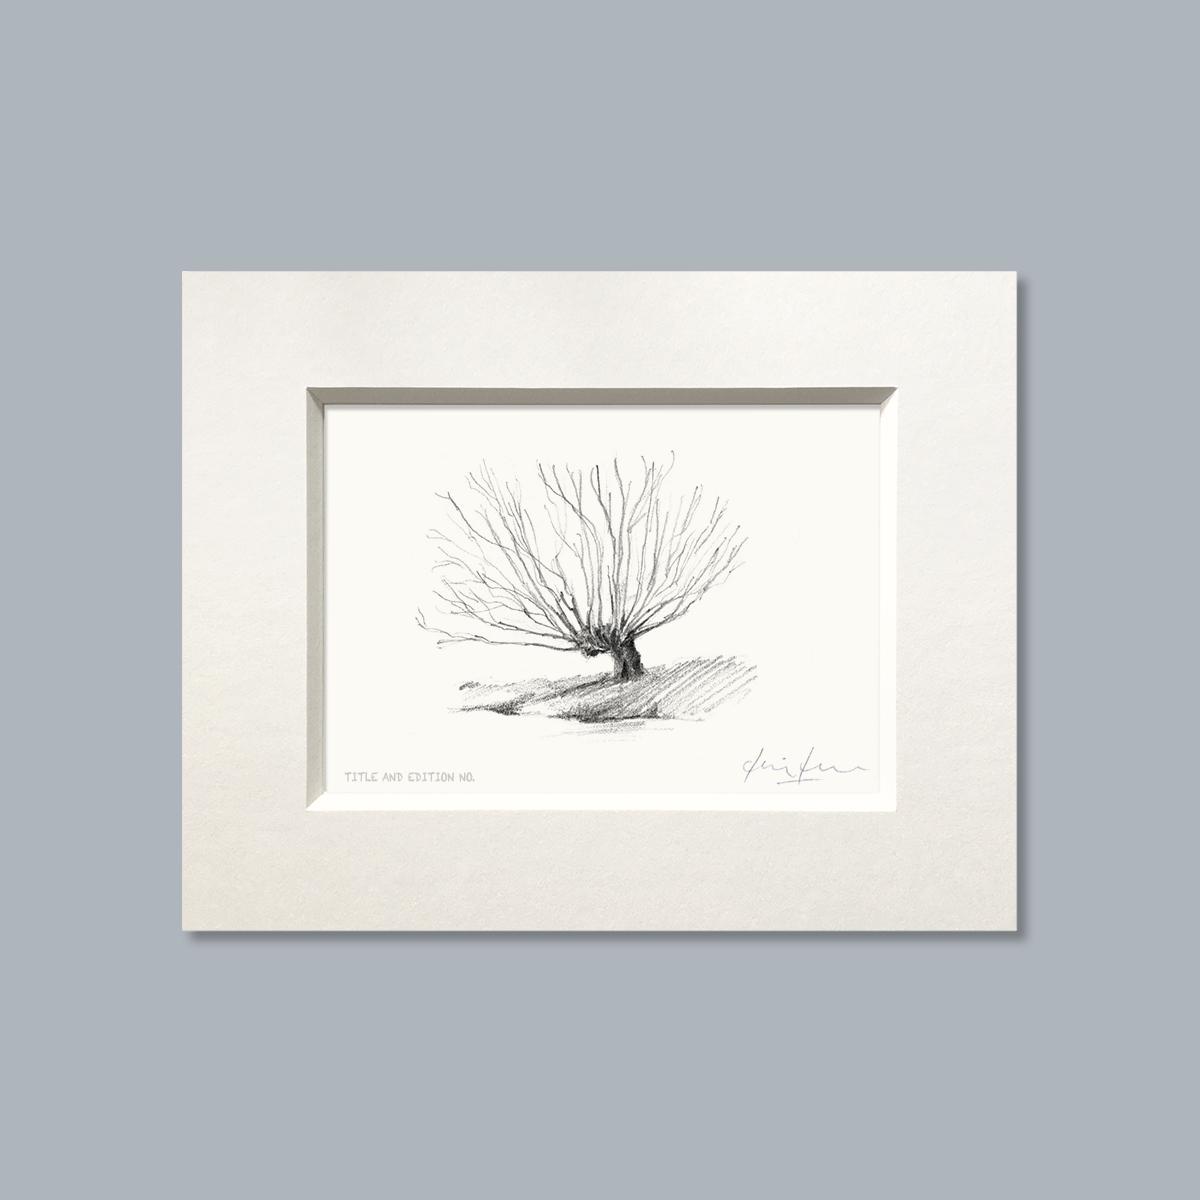 Limited edition print from pencil sketch of a willow tree in a white mount